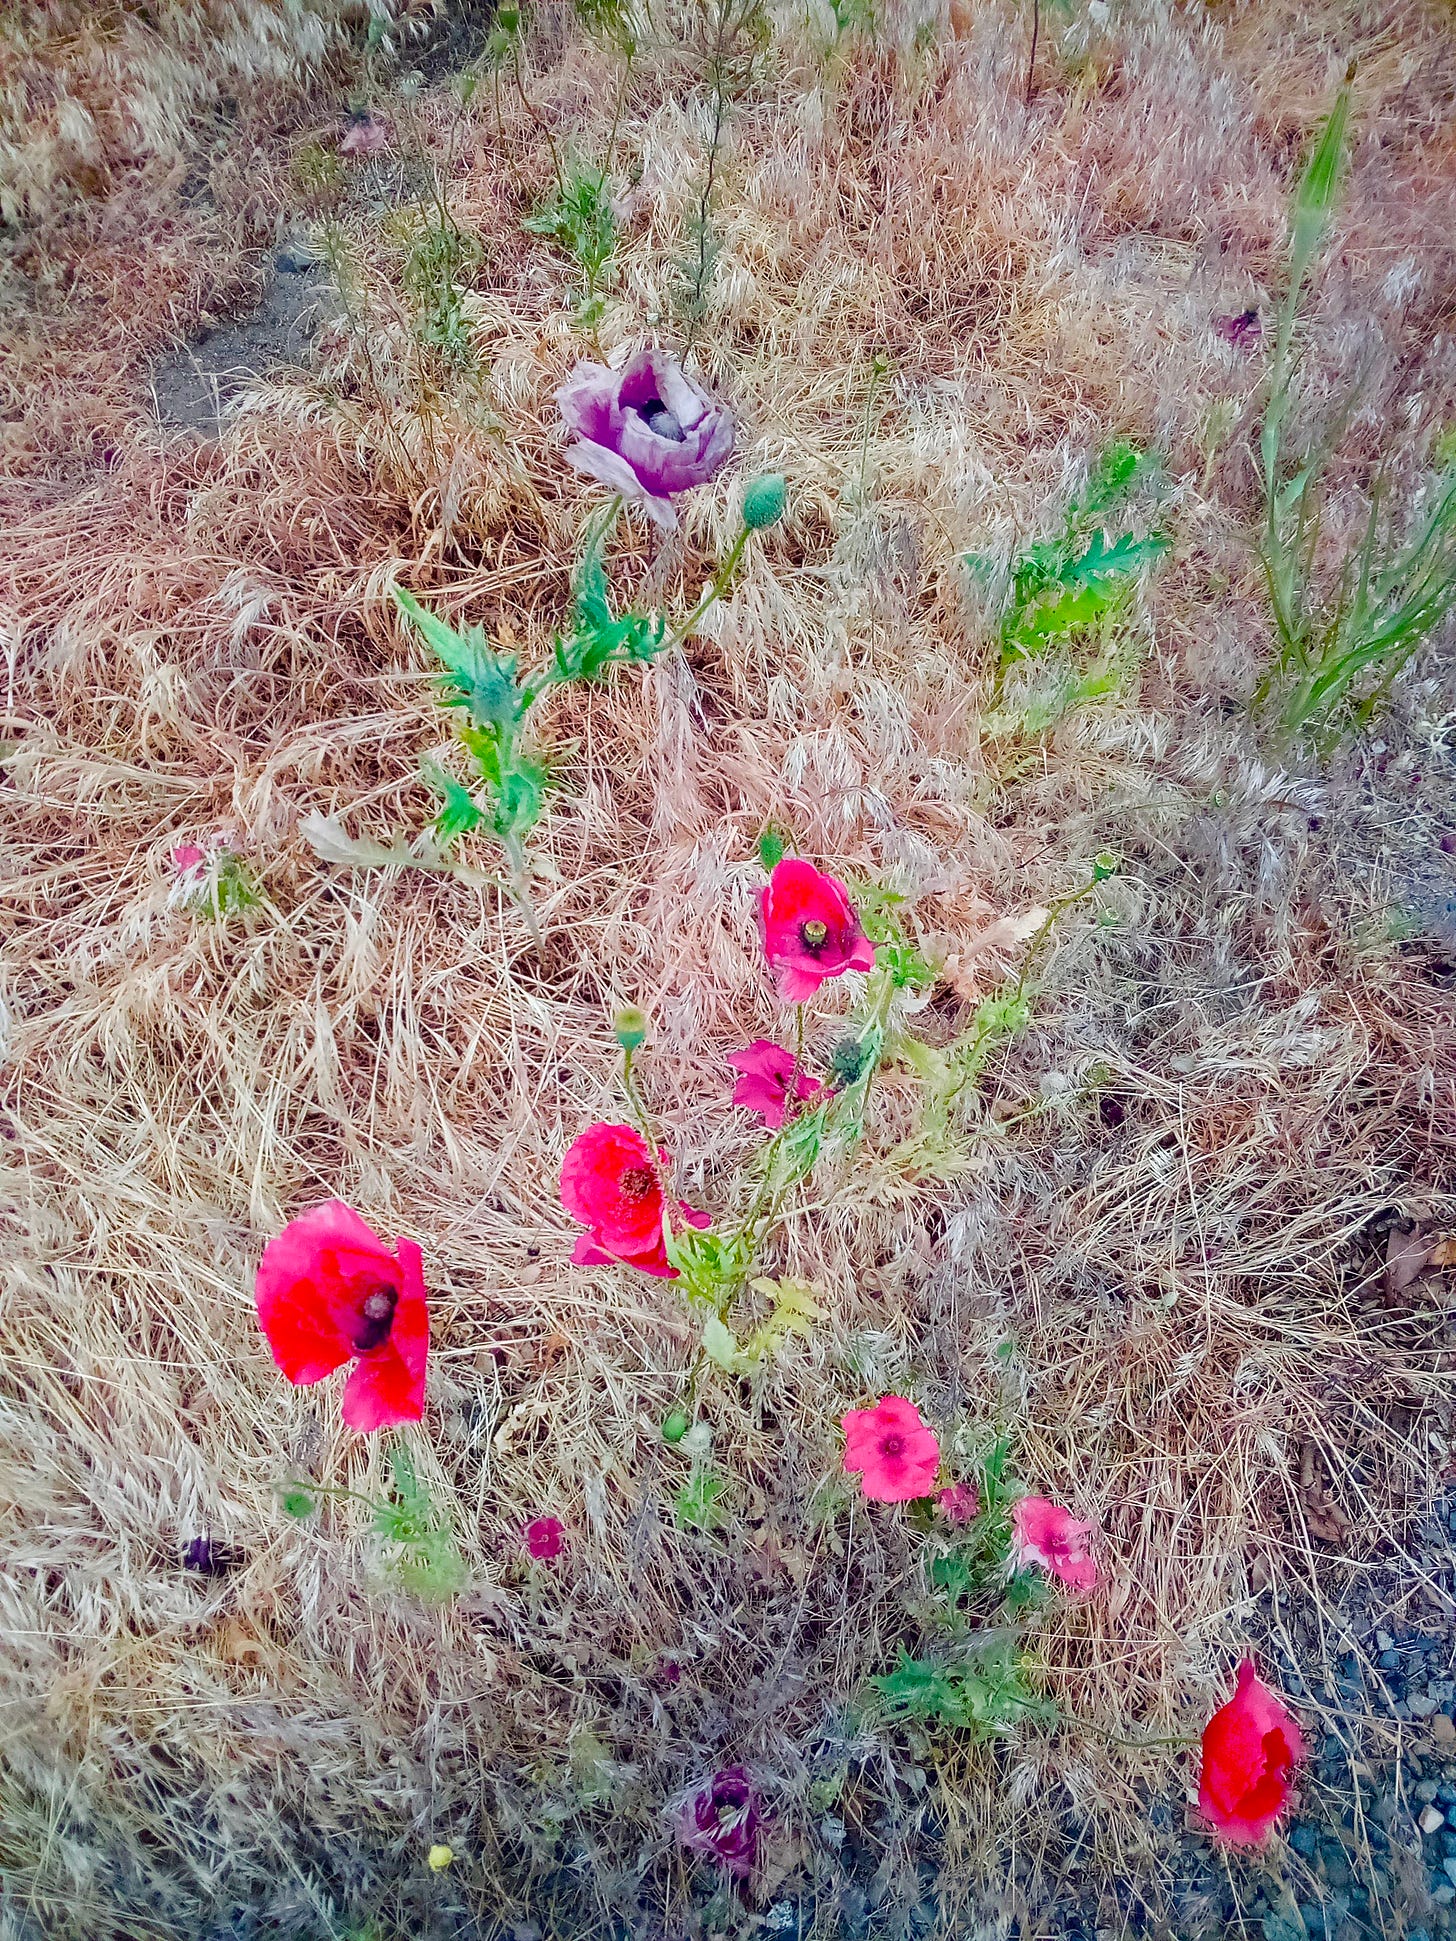 Red poppies in a field of dried grass.